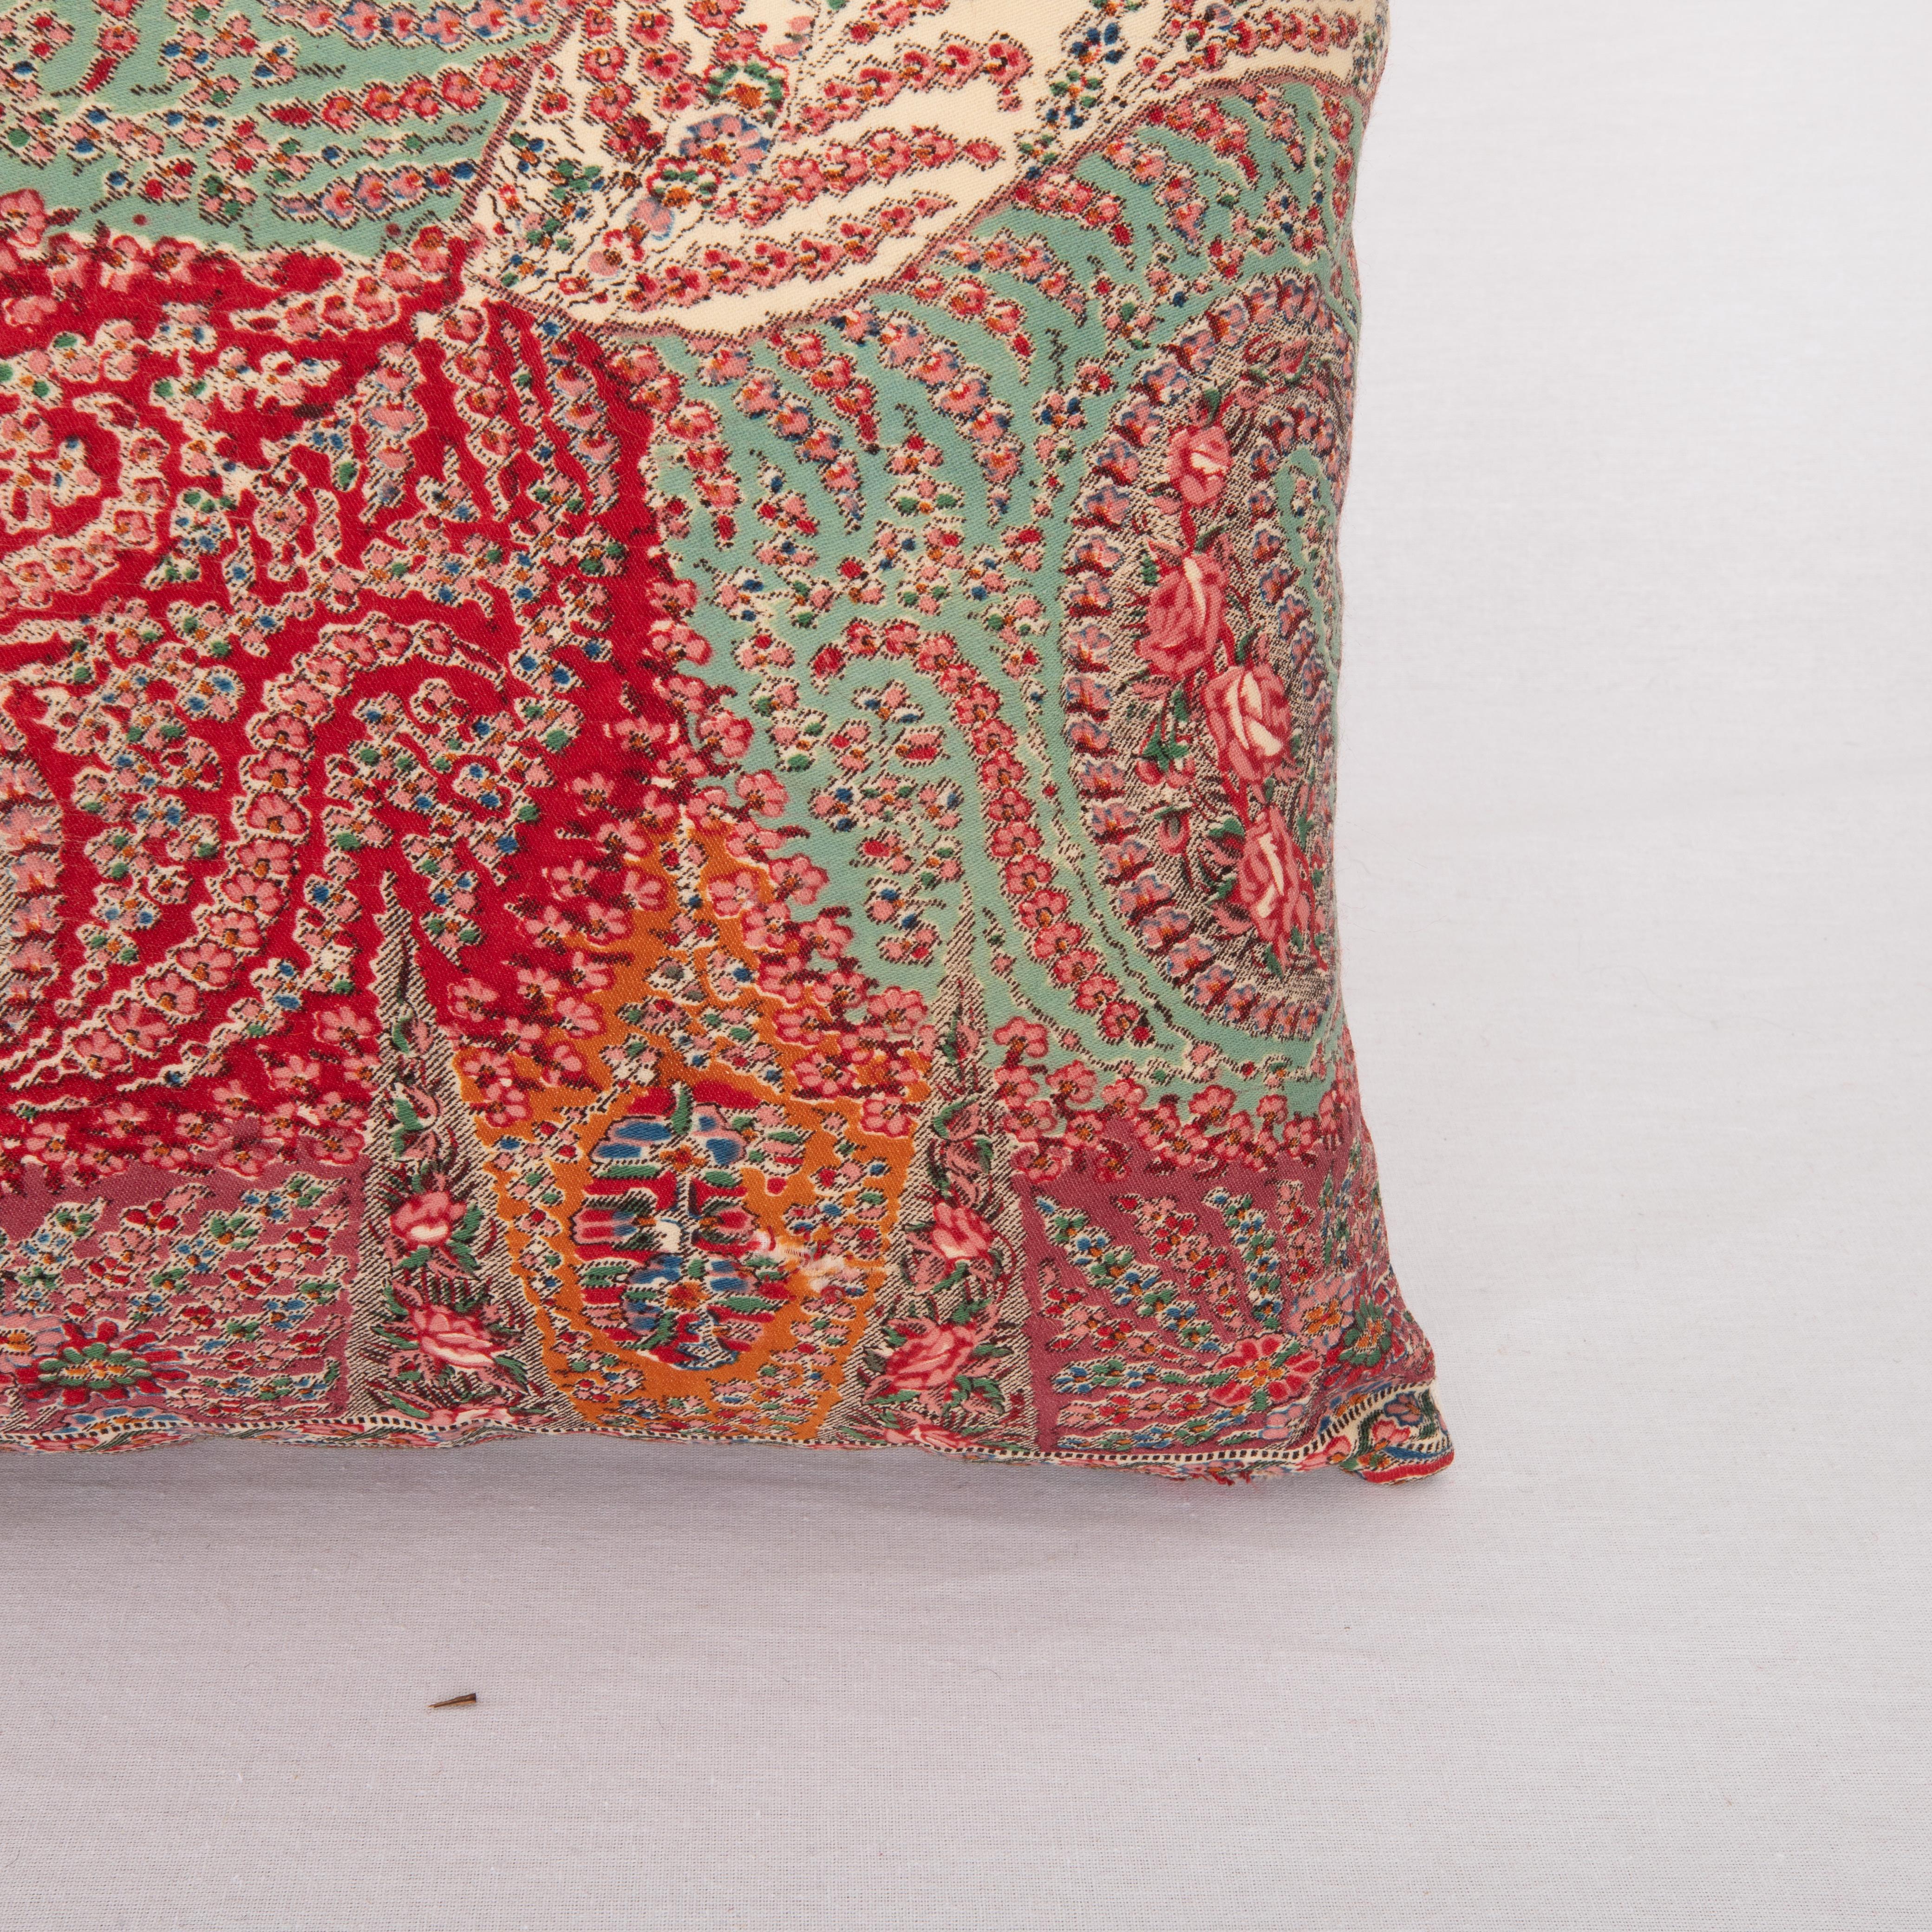 Woven  Pillow Cover Made from an English Printed Shawl, 19th C. For Sale